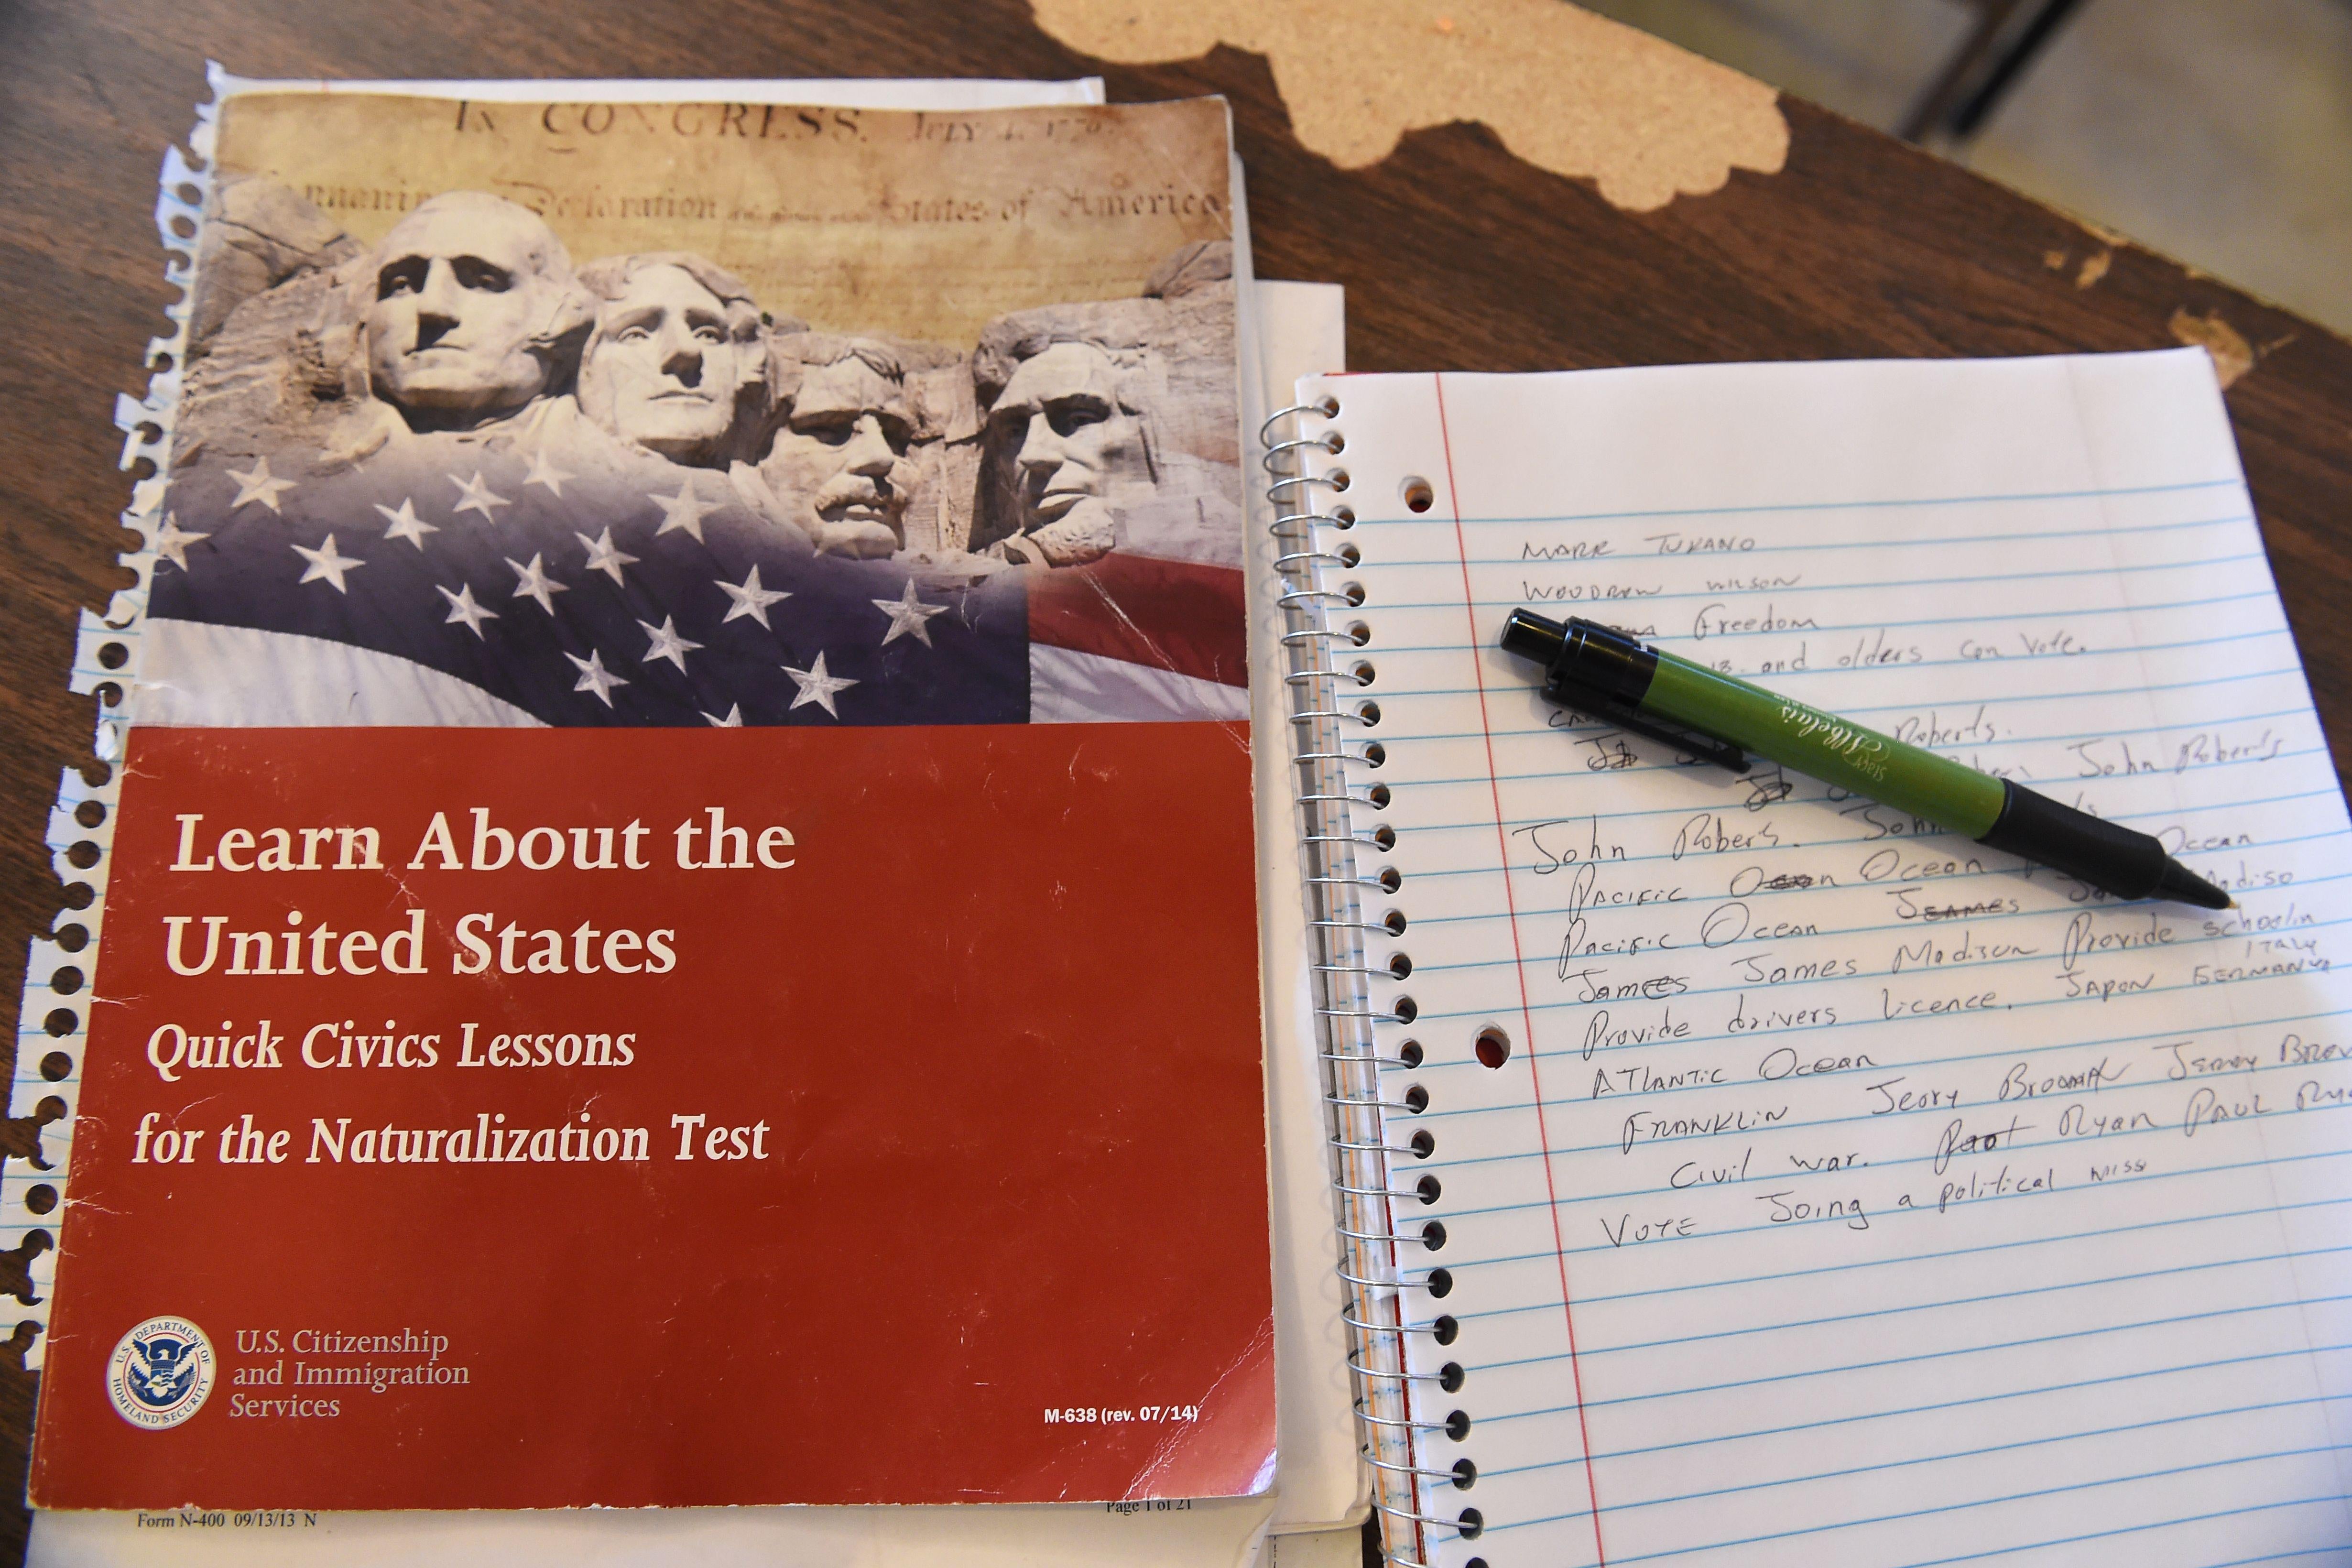 A U.S. citizenship test review booklet and notes are seen during a citizenshipt test prearation class in Perris, California, June 16, 2016. The 11 million undocumented immigrants in the United States are at the heart of a contentious debate that has stirred up passions and become a defining issue in the US presidential race, leading many immigrants who are eligible to become US citizen to take the step necessary to obtain their citizenship so they can vote in the November election. / AFP / ROBYN BECK        (Photo credit should read ROBYN BECK/AFP via Getty Images)